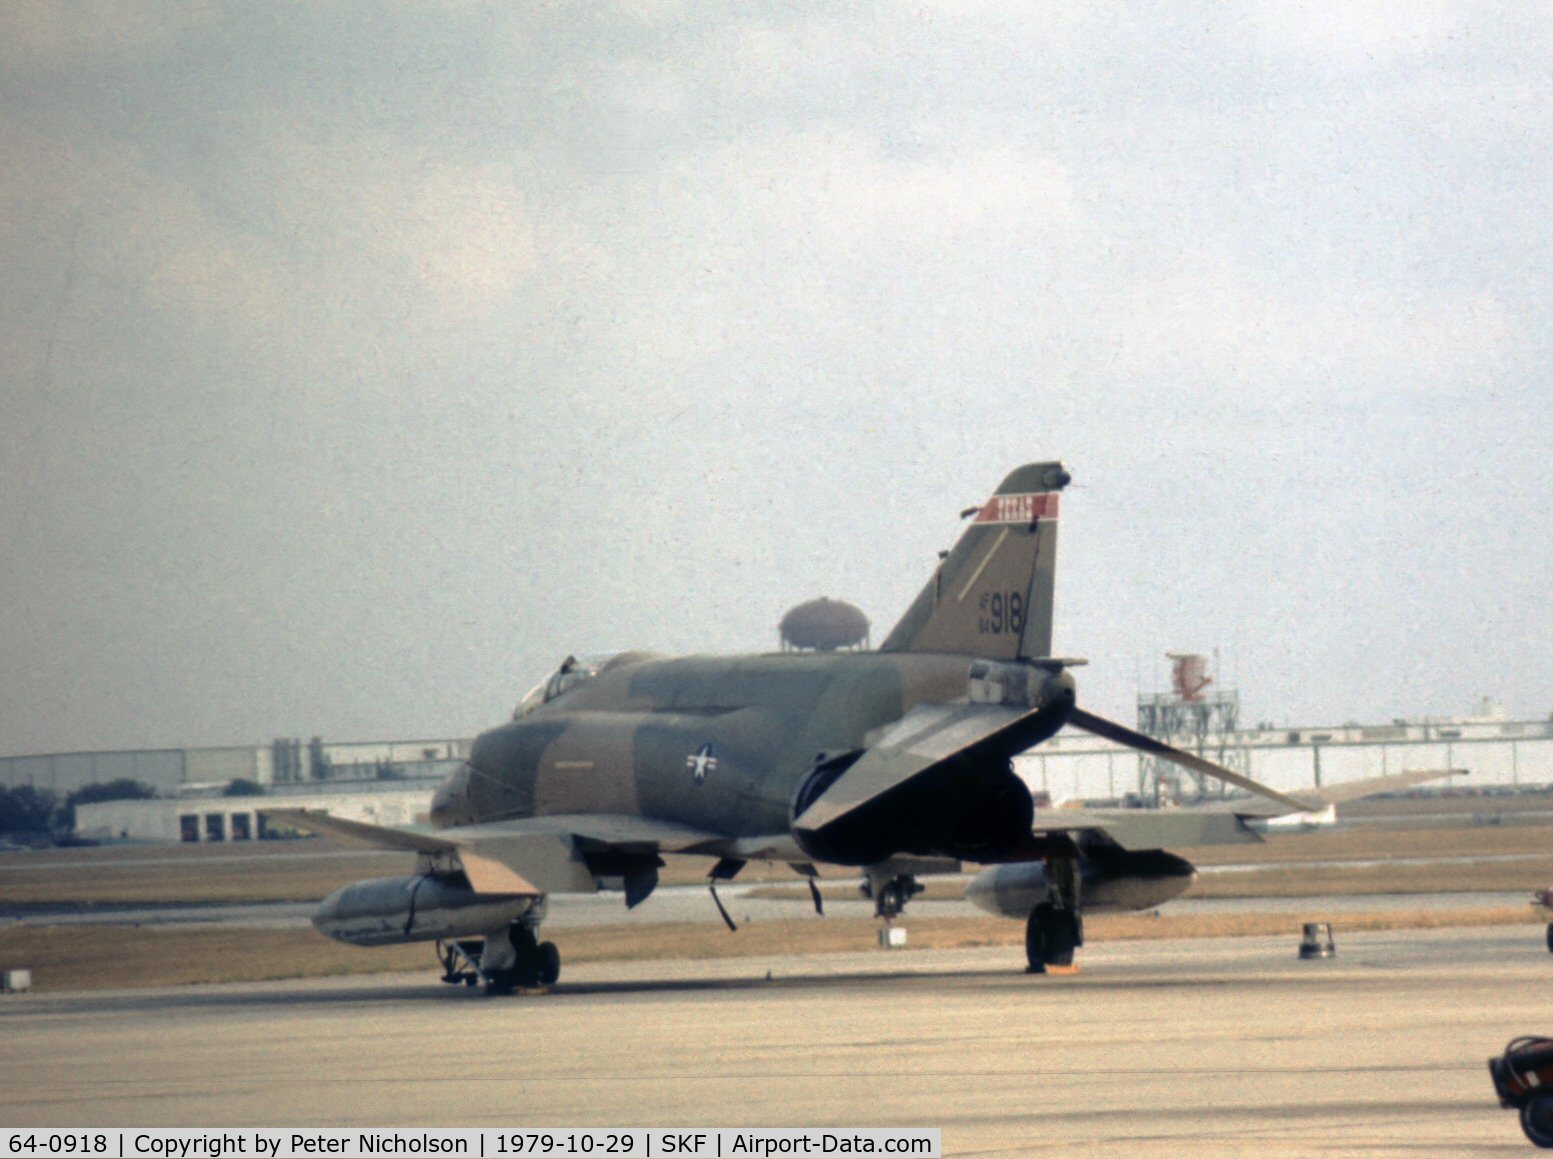 64-0918, 1964 McDonnell F-4C Phantom II C/N 1387, F-4C Phantom of 182nd Tactical Fighter Squadron Texas ANG seen at Kelly AFB in October 1979.